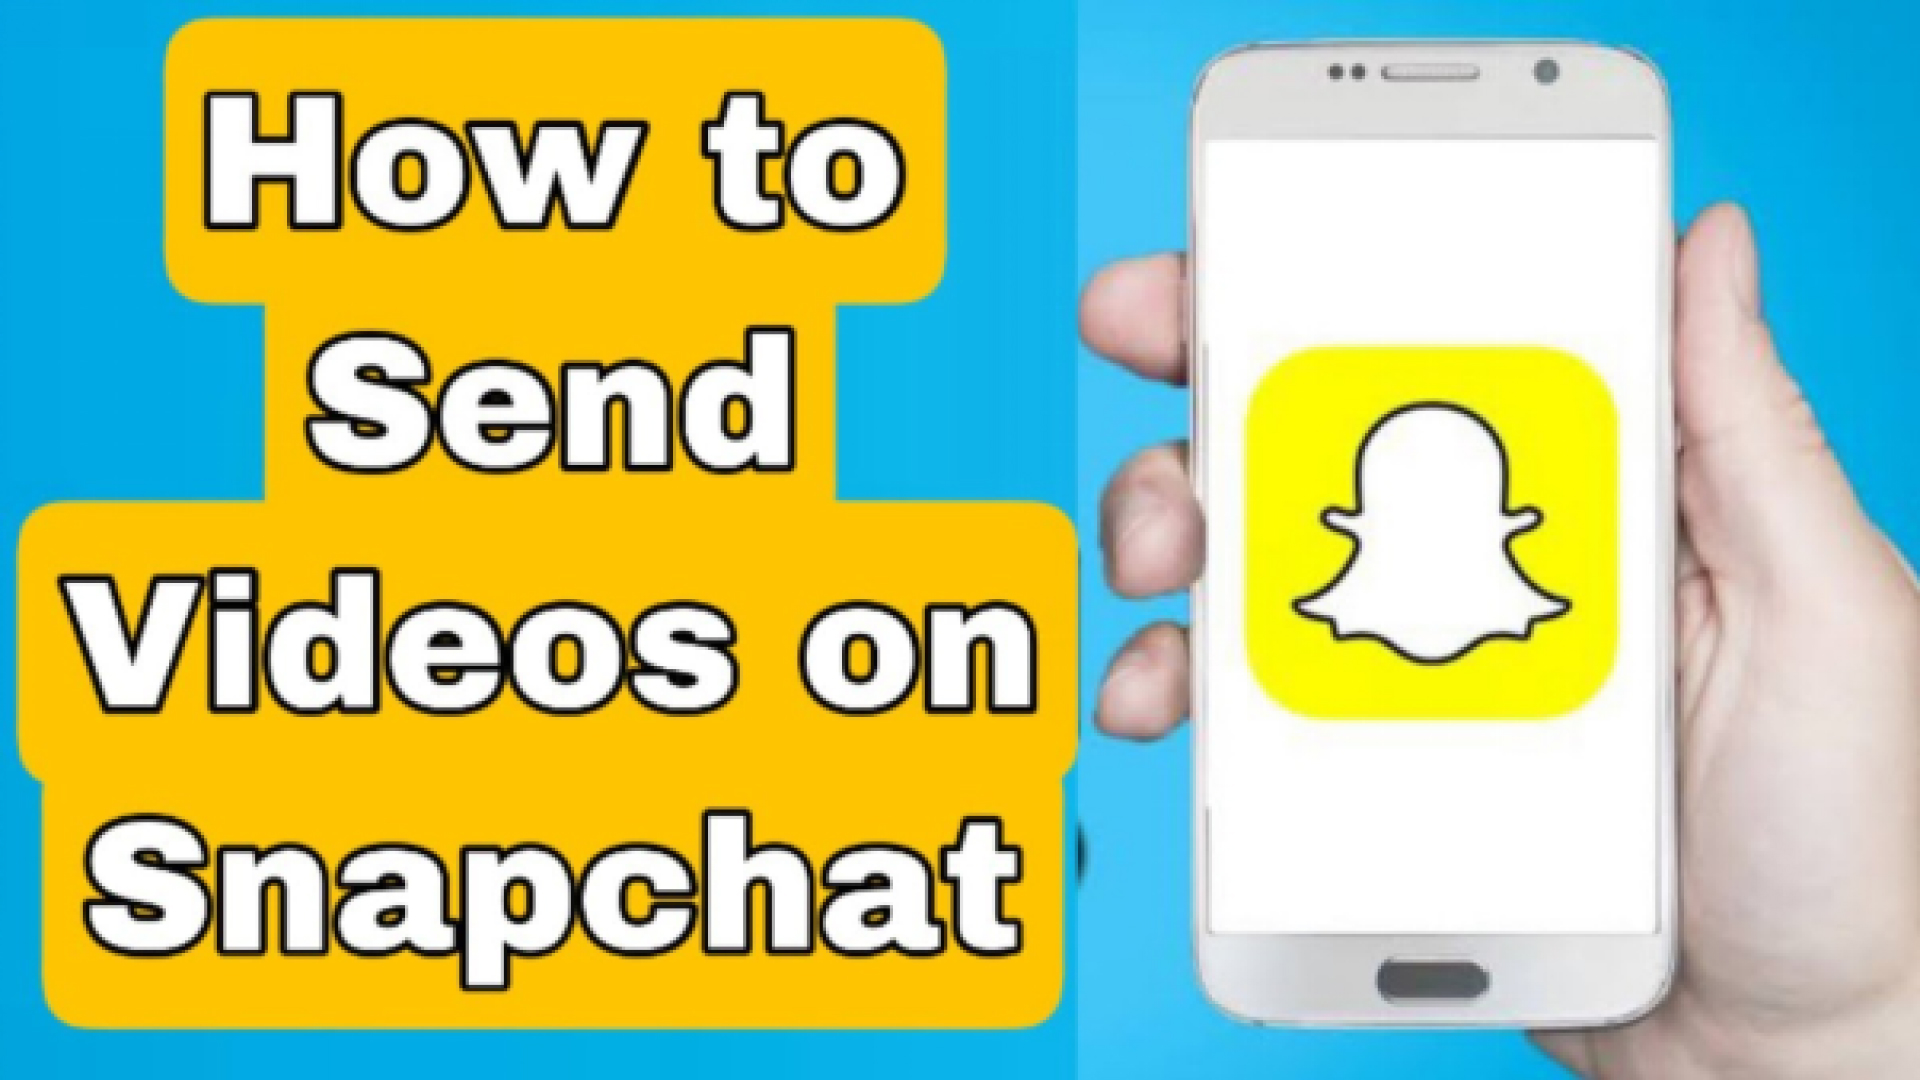 Fixed! How to Send A Video in Snapchat?